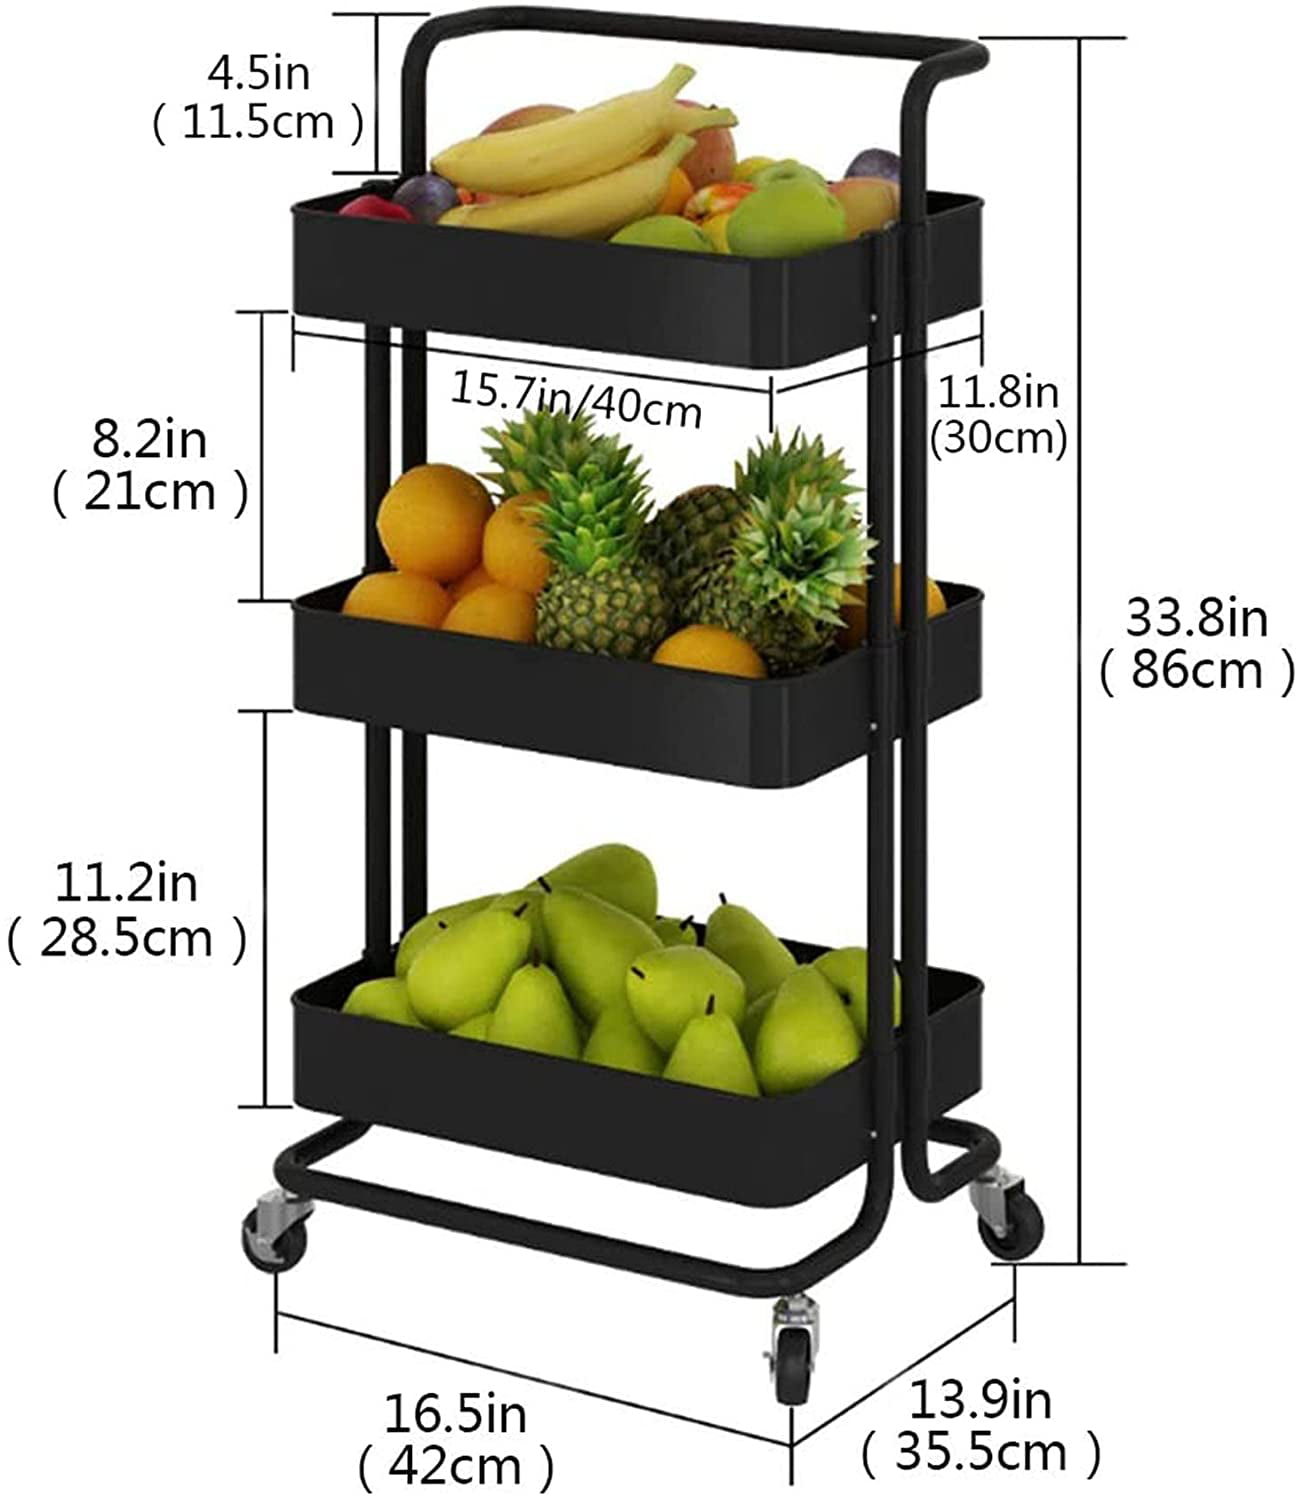 SKONYON 3-Tier Kitchen Utility Cart with Handle and Lockable Wheels， Black